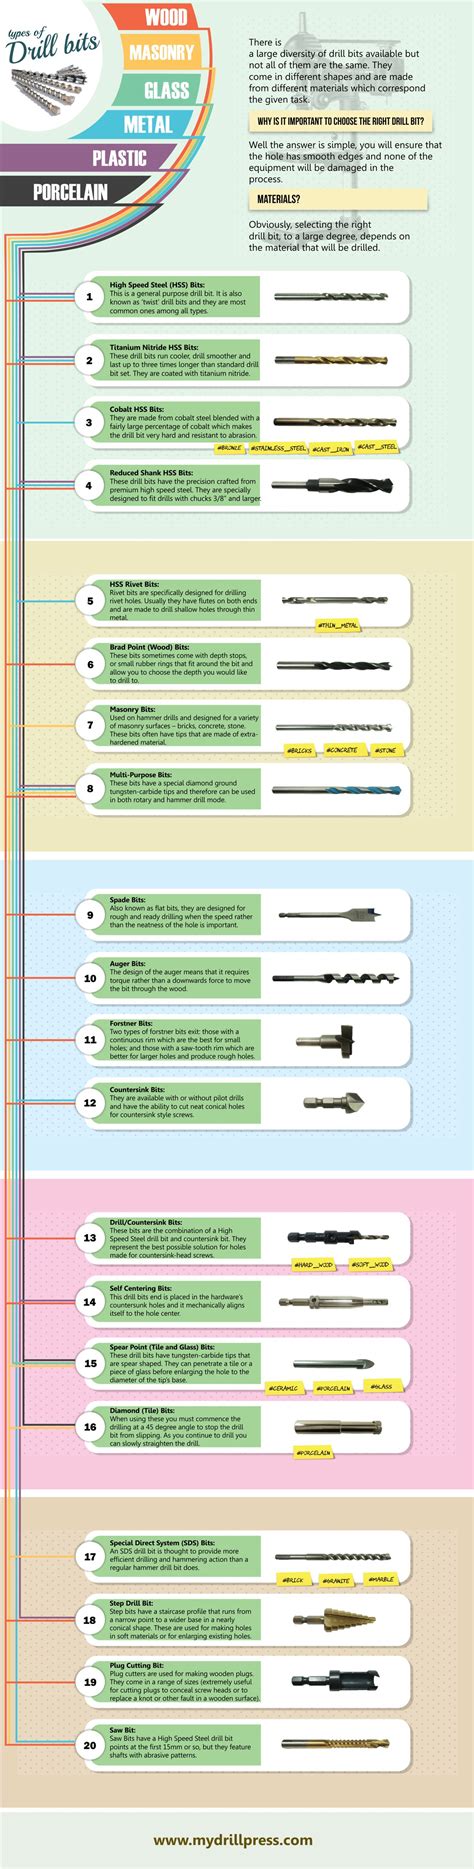 Types Of Drill Bits Infographic